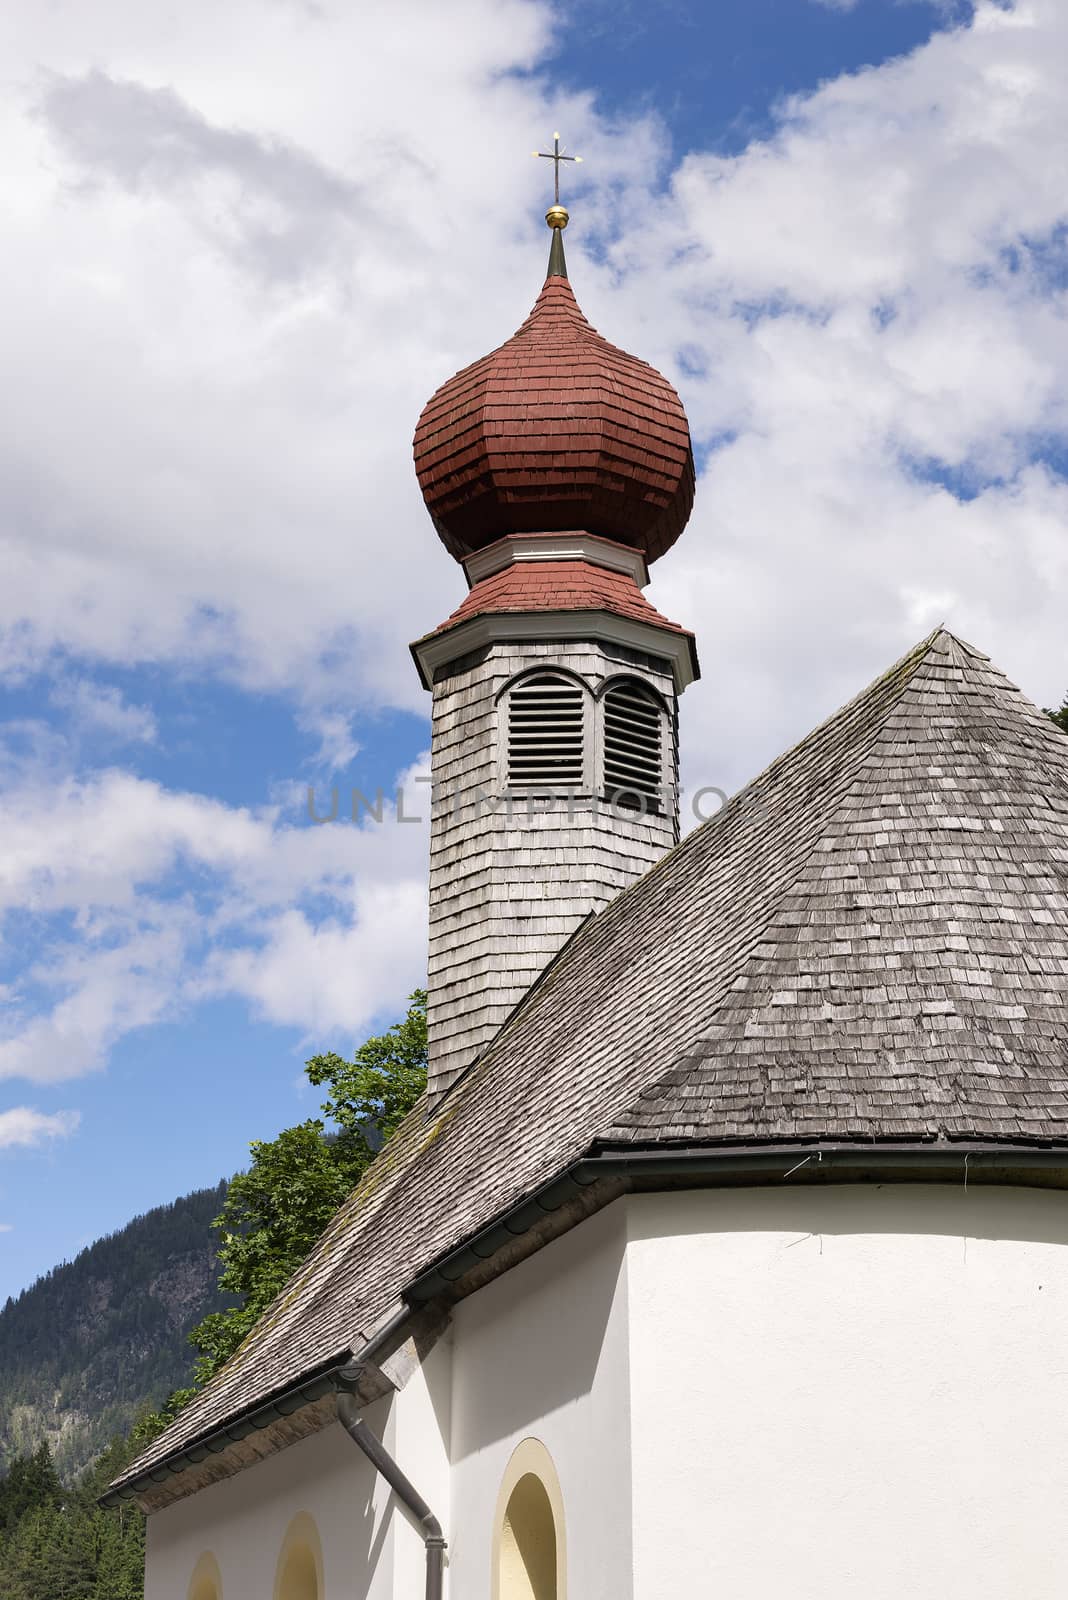 Image of a chapel in Austria, Tyrol